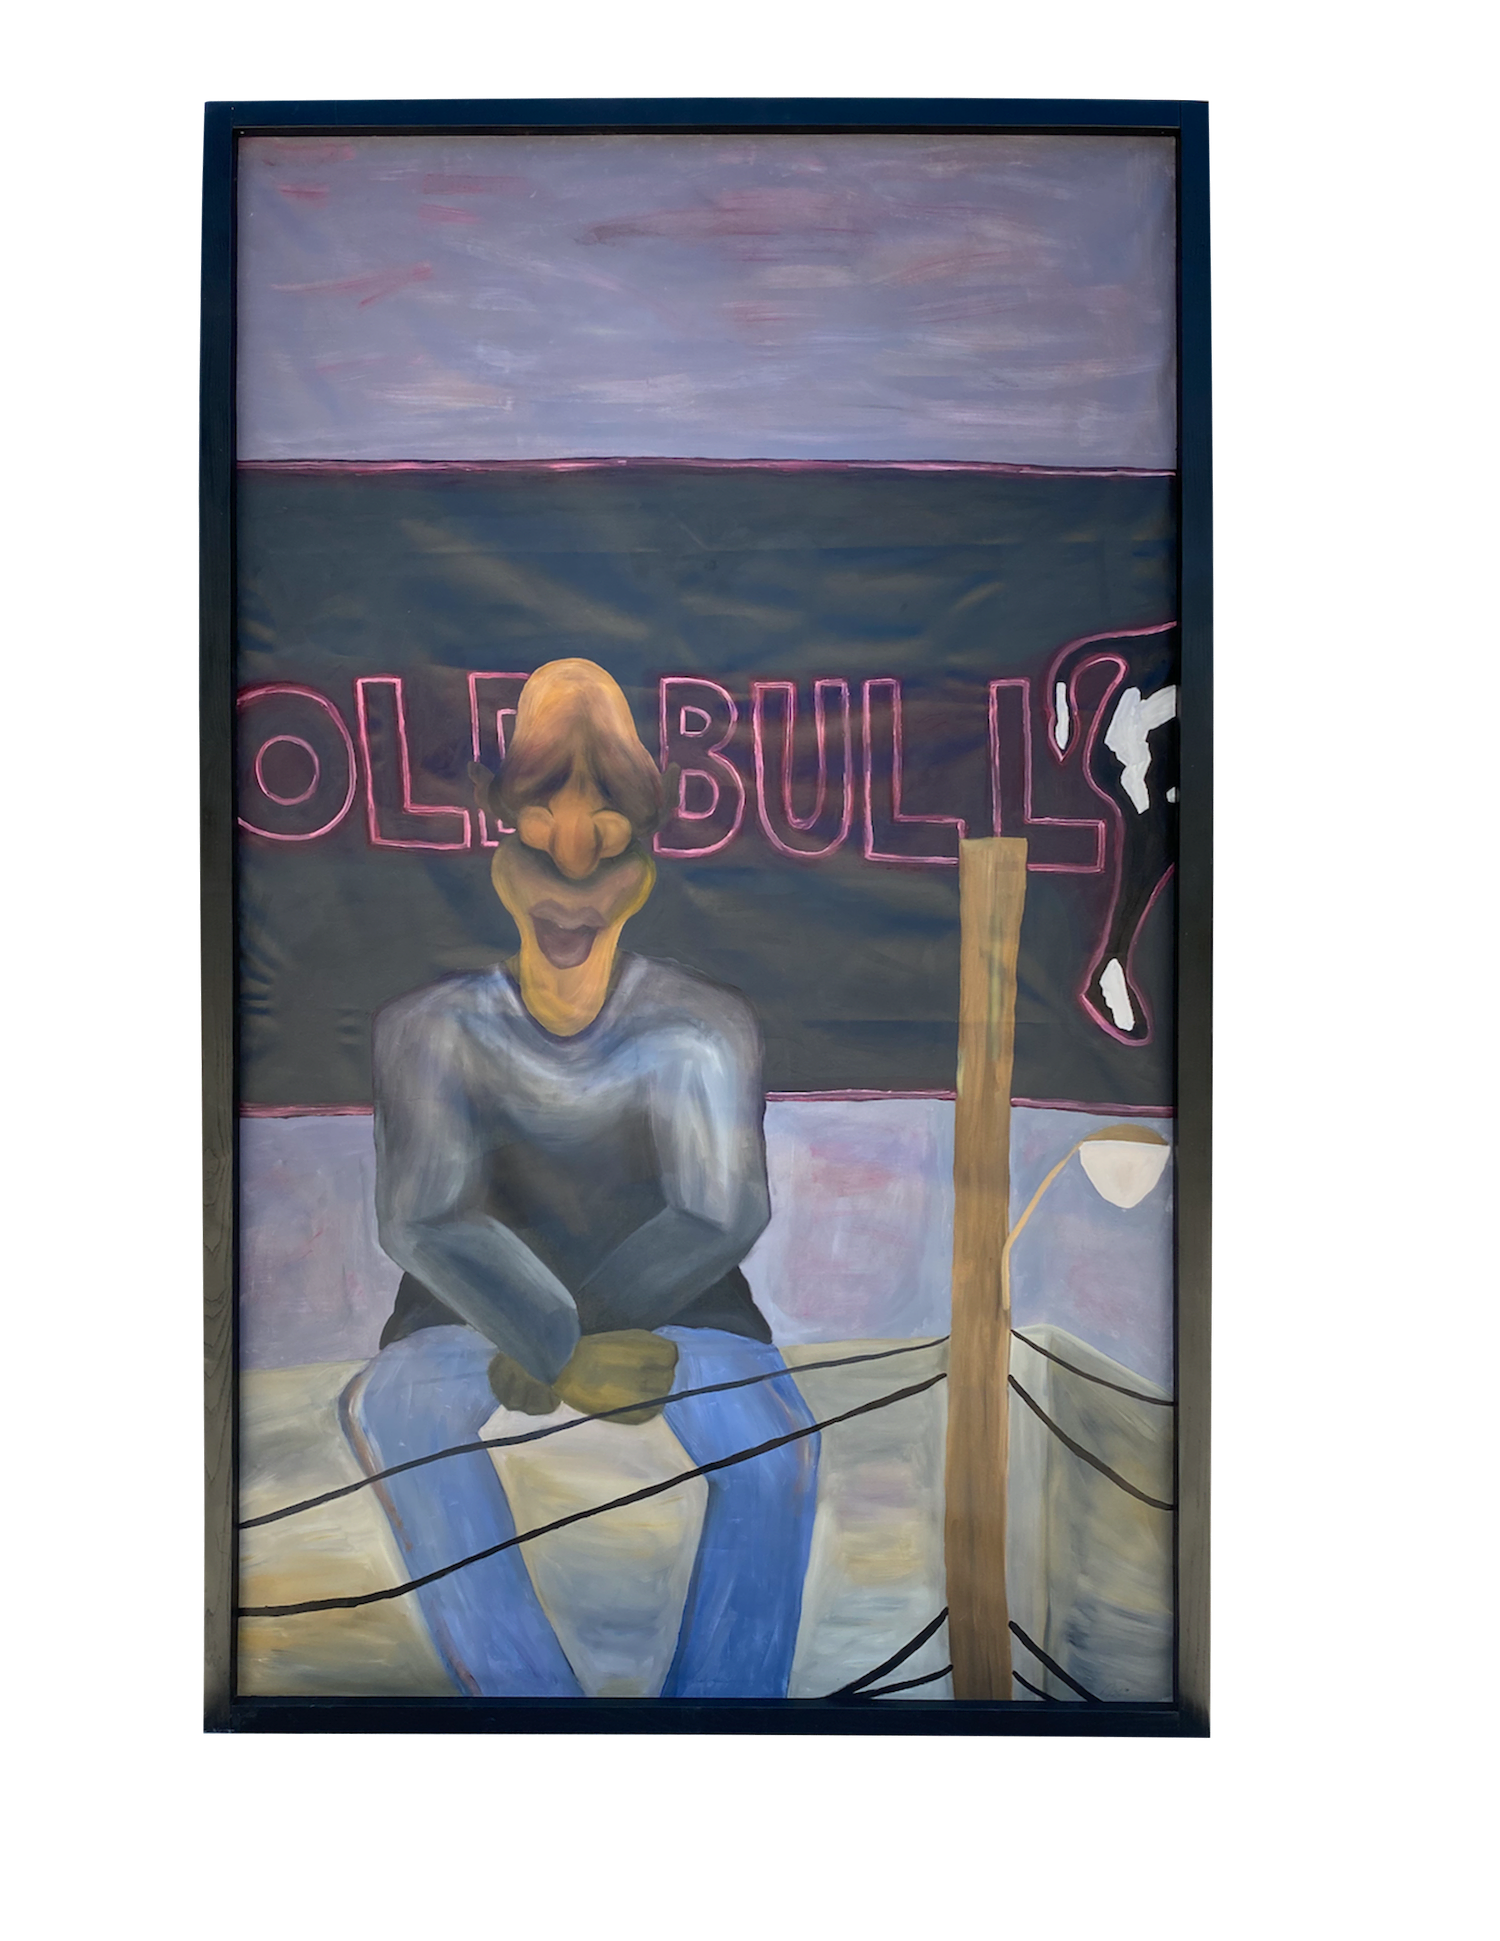 An abstracted painting of a Black figure sitting on top of a historical building in front of the Old Bull neon sign downtown Durham during dawn.